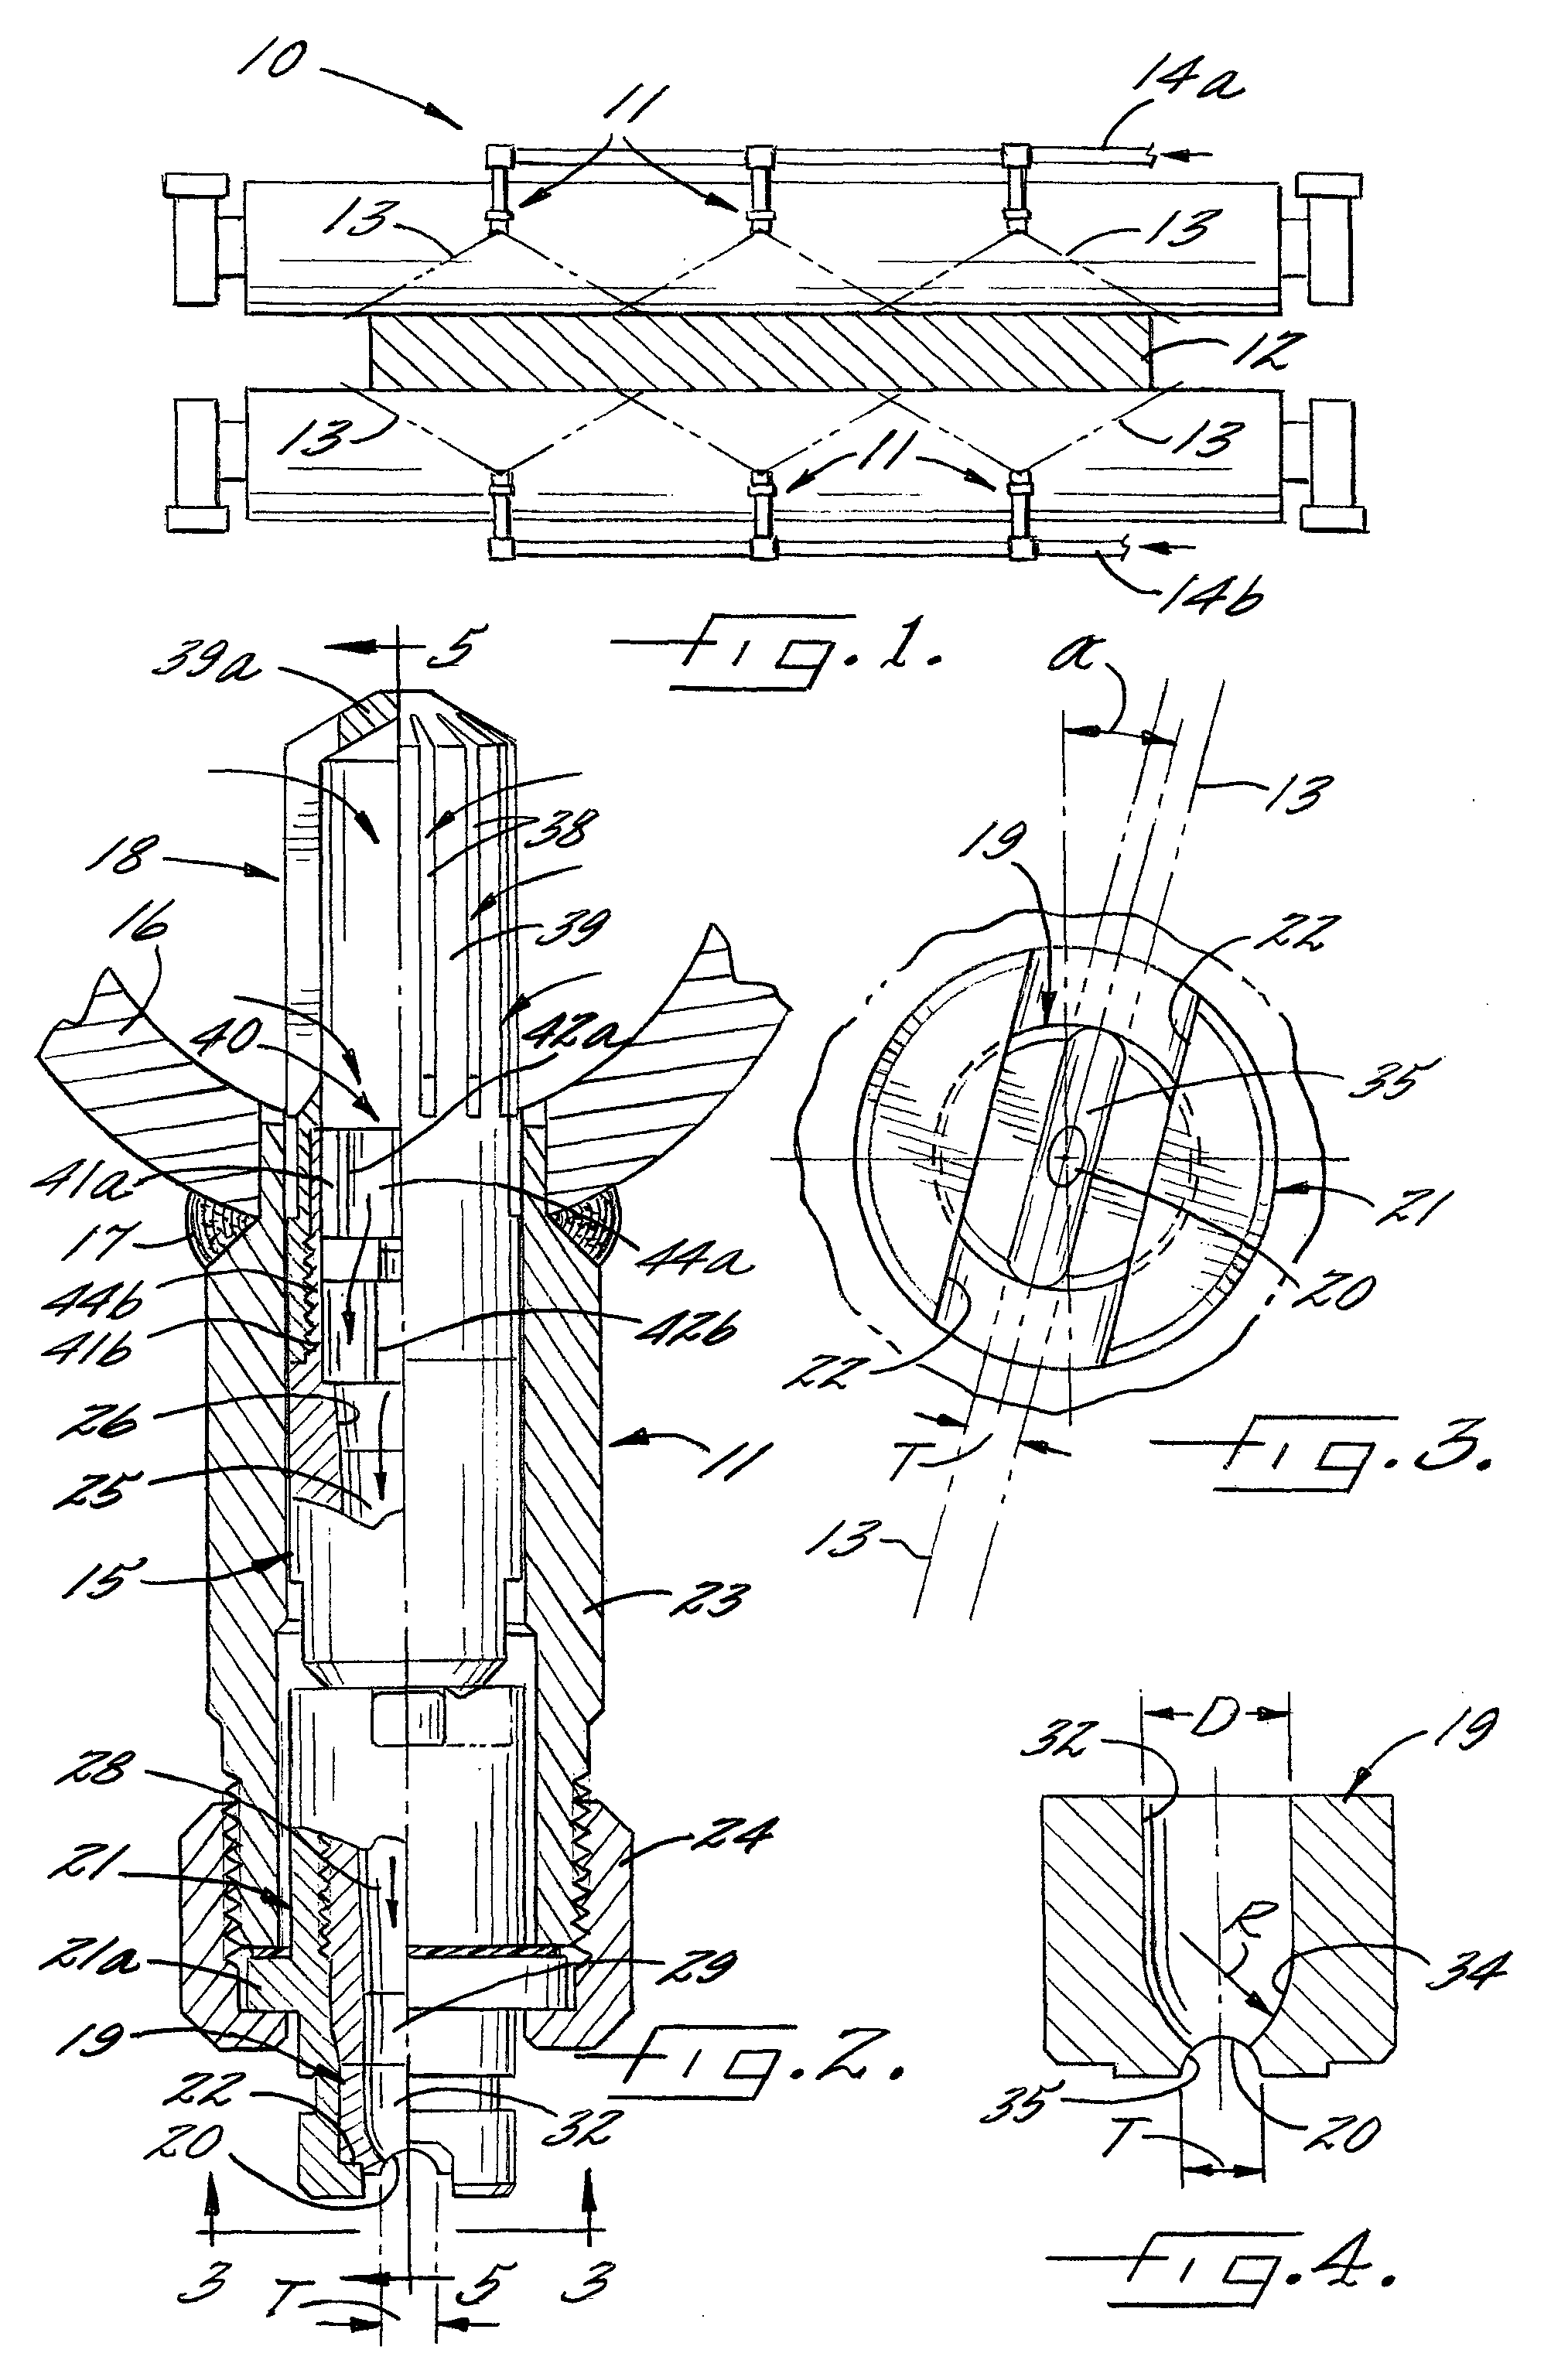 Descaling spray nozzle assembly